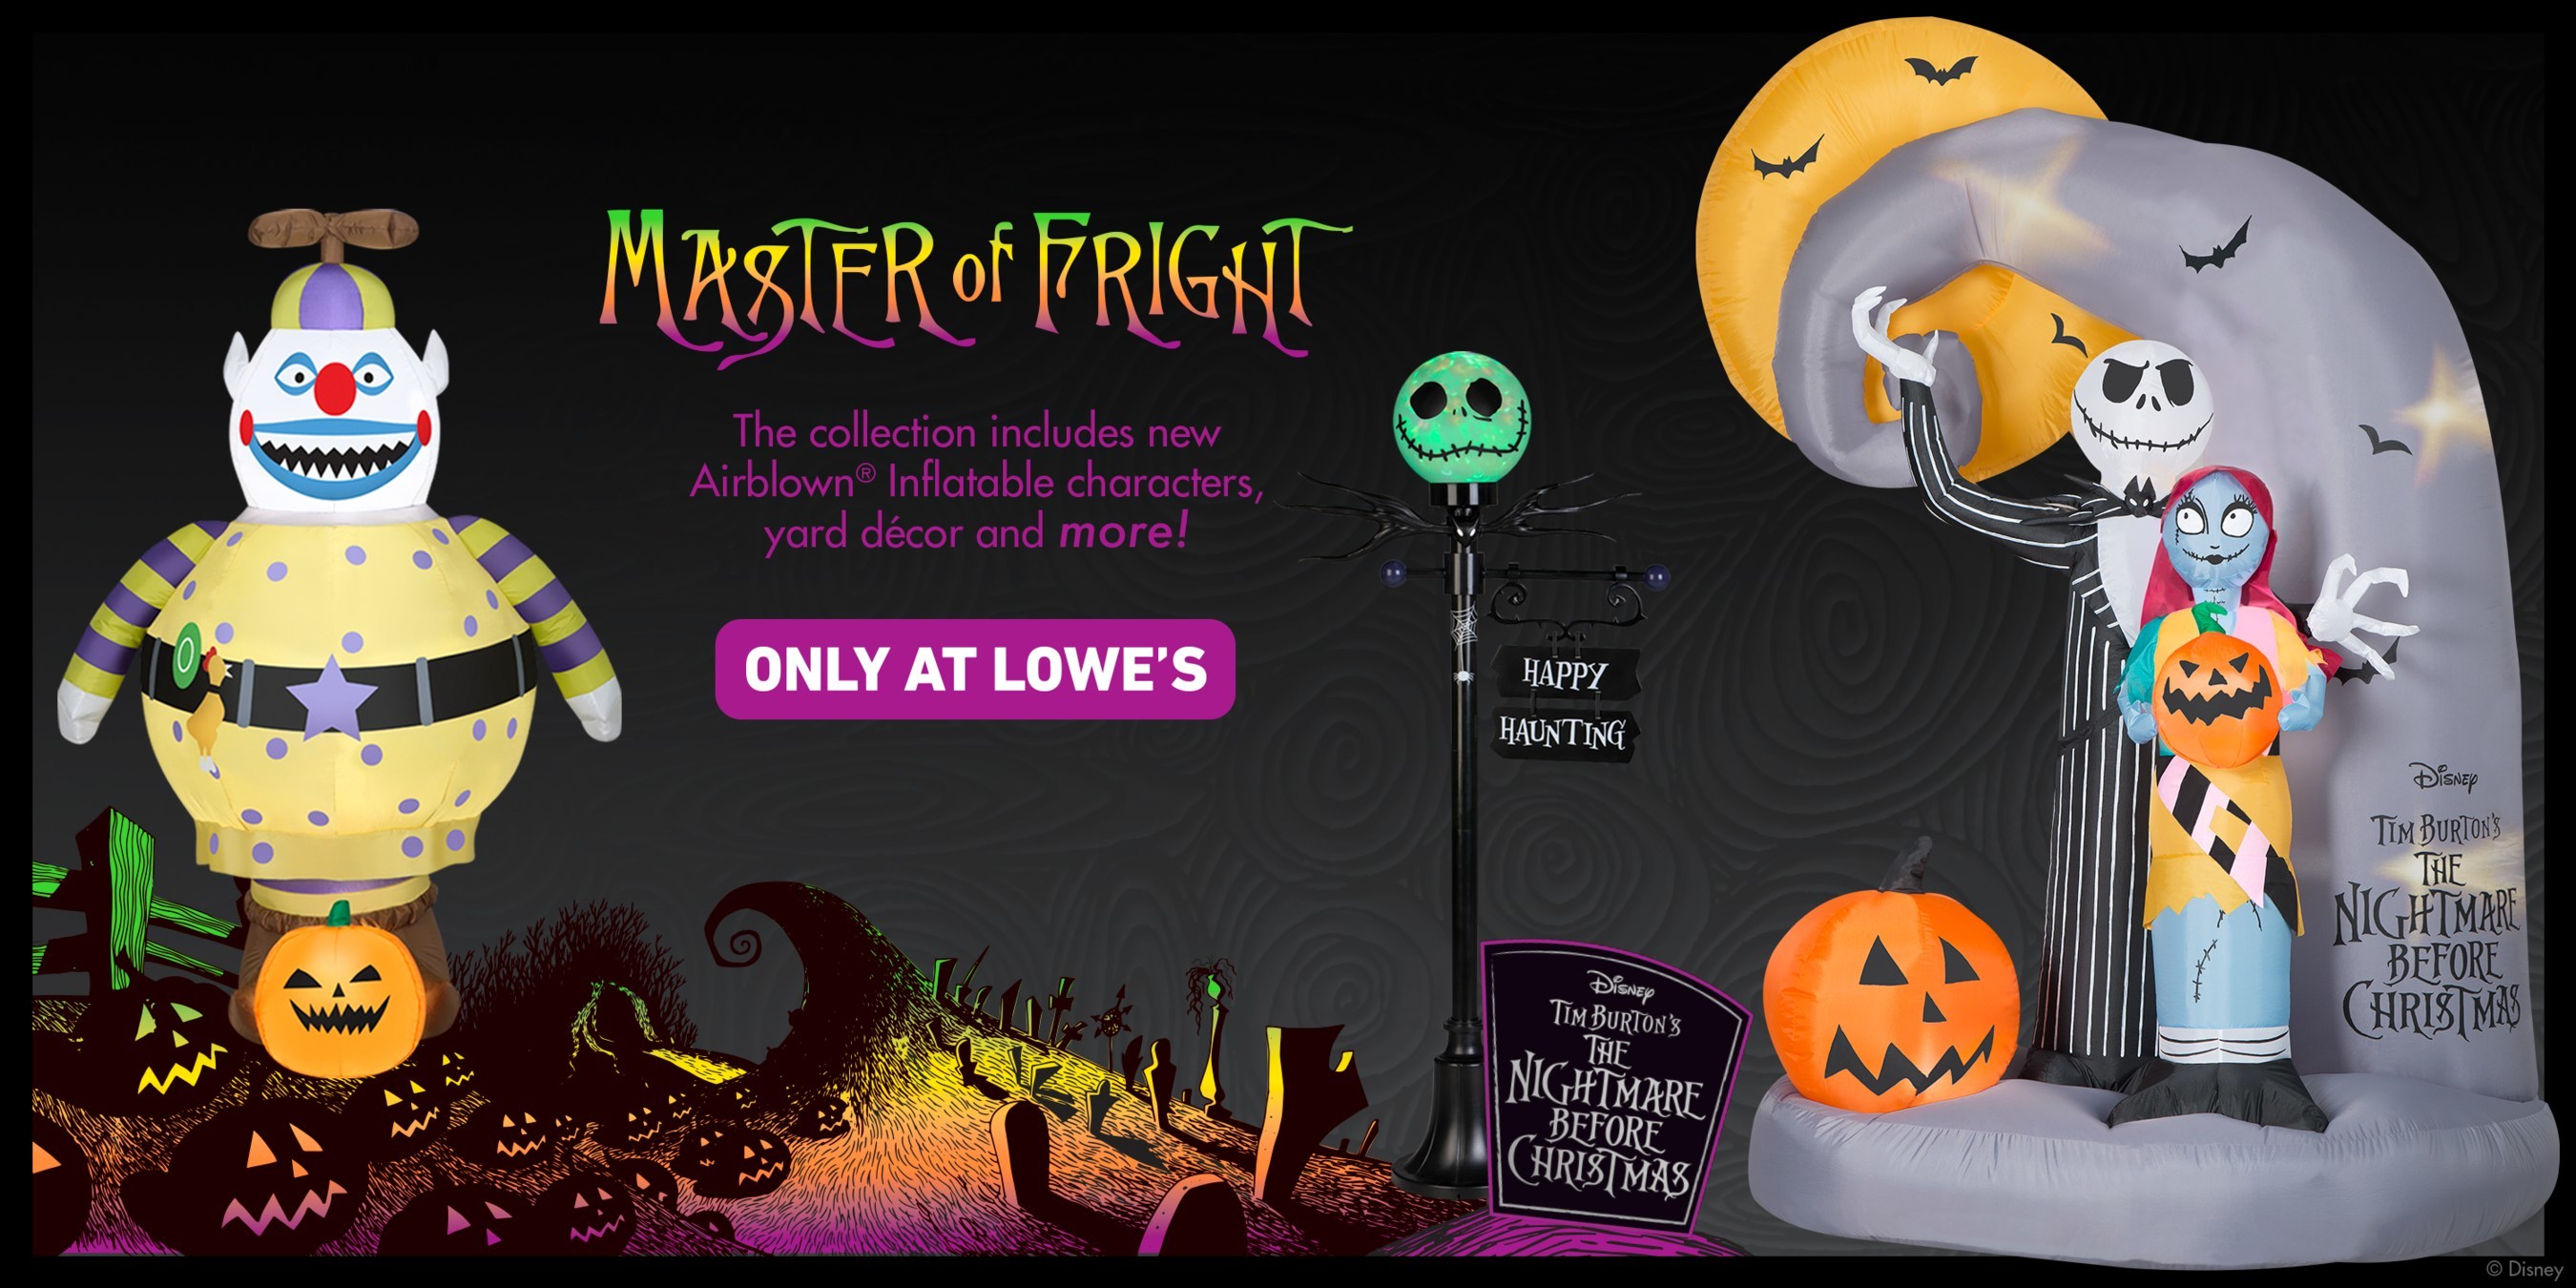 Halloween 22 At Lowe S Includes New Nightmare Before Christmas Collection Pennlive Com